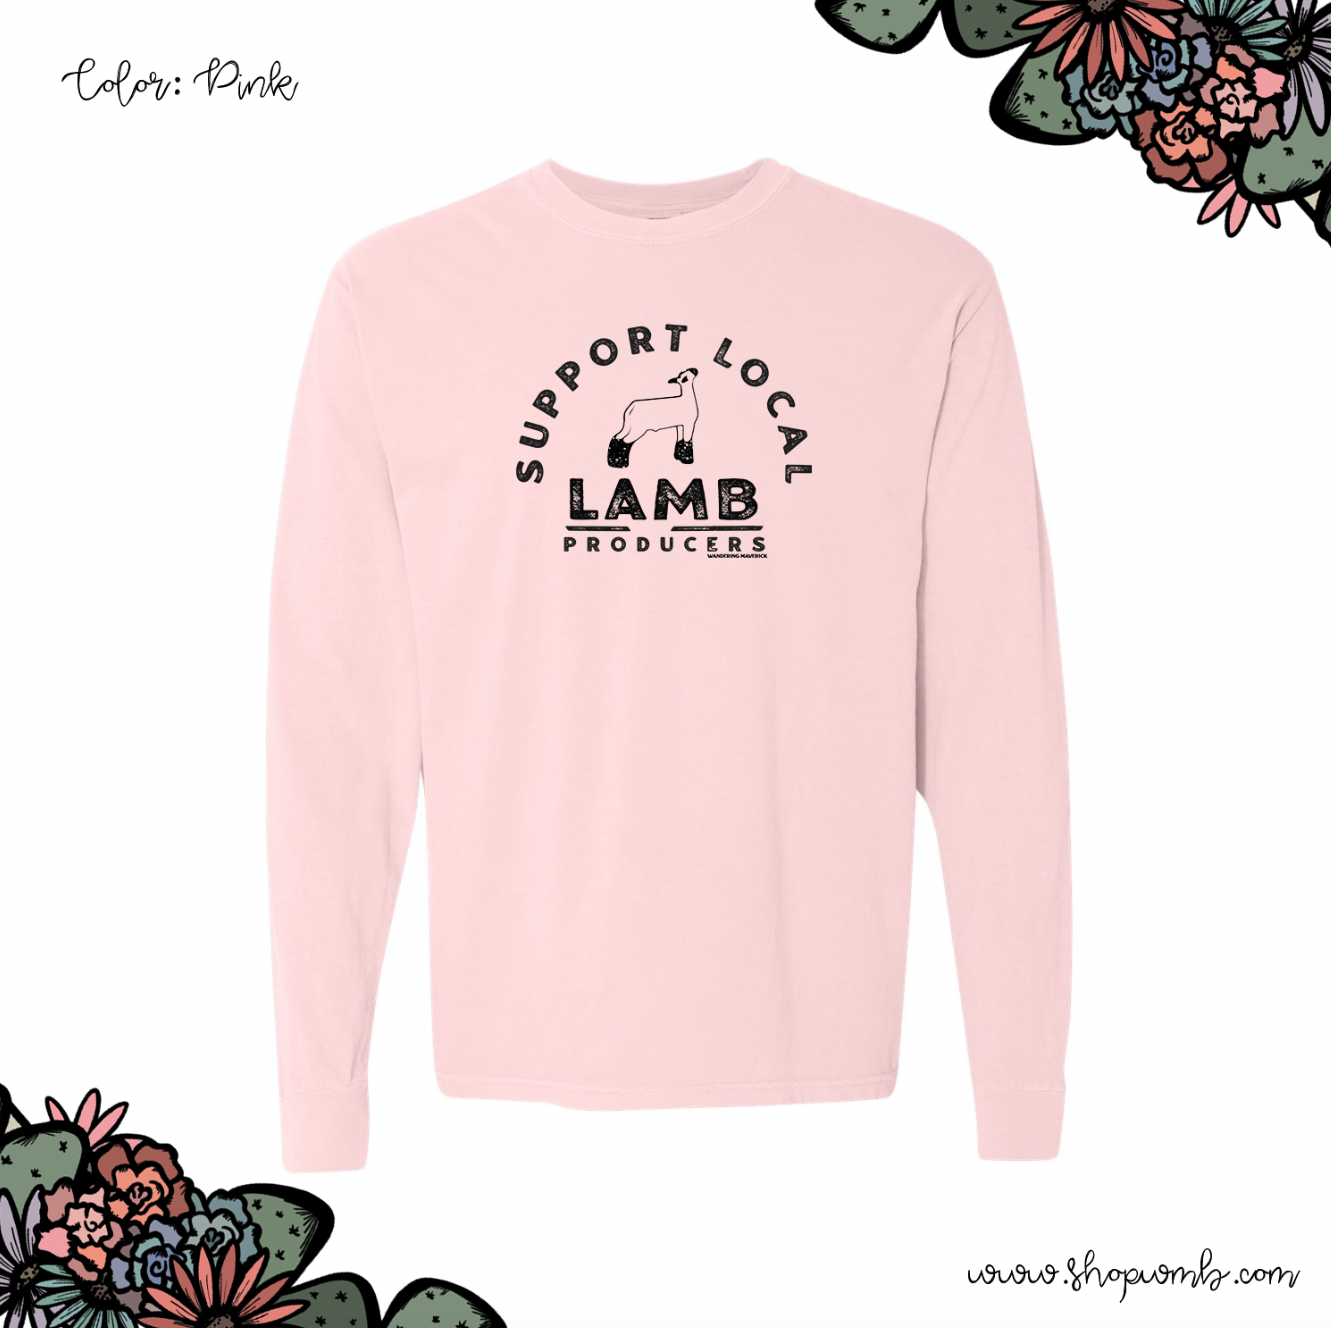 Support Local Lamb Producers LONG SLEEVE T-Shirt (S-3XL) - Multiple Colors!